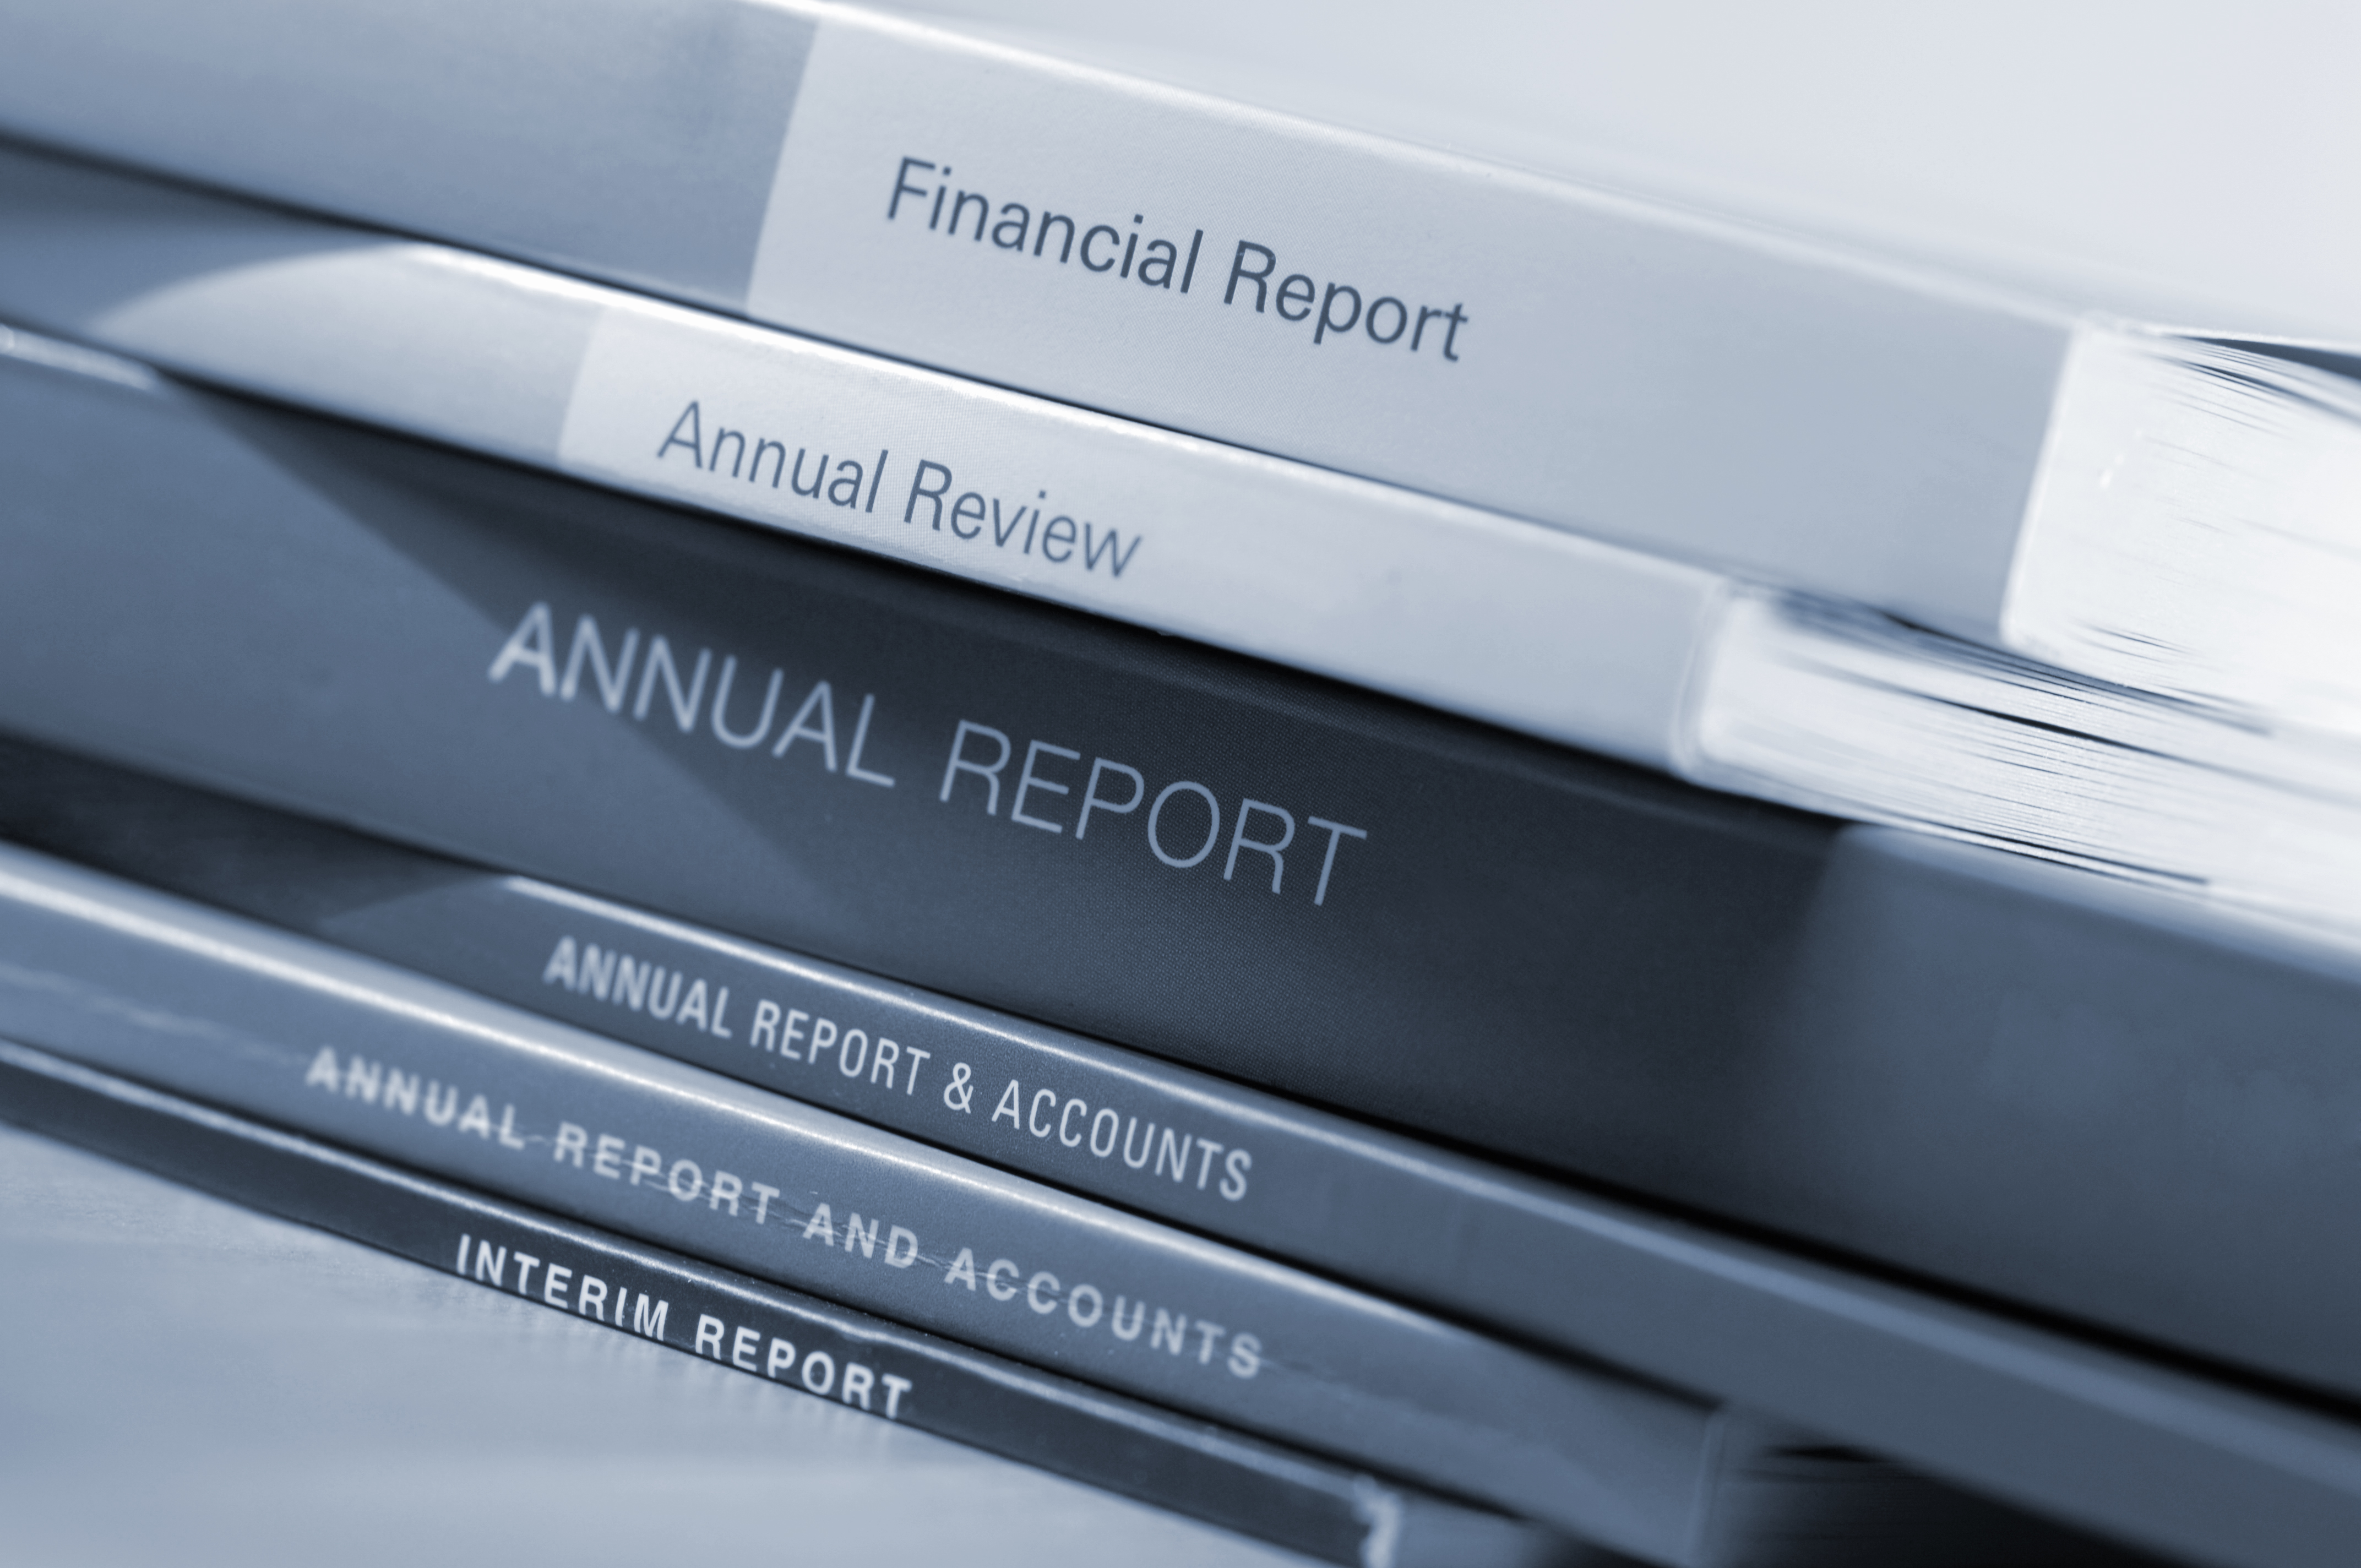 How to Prevent Costly Financial Reporting Mistakes